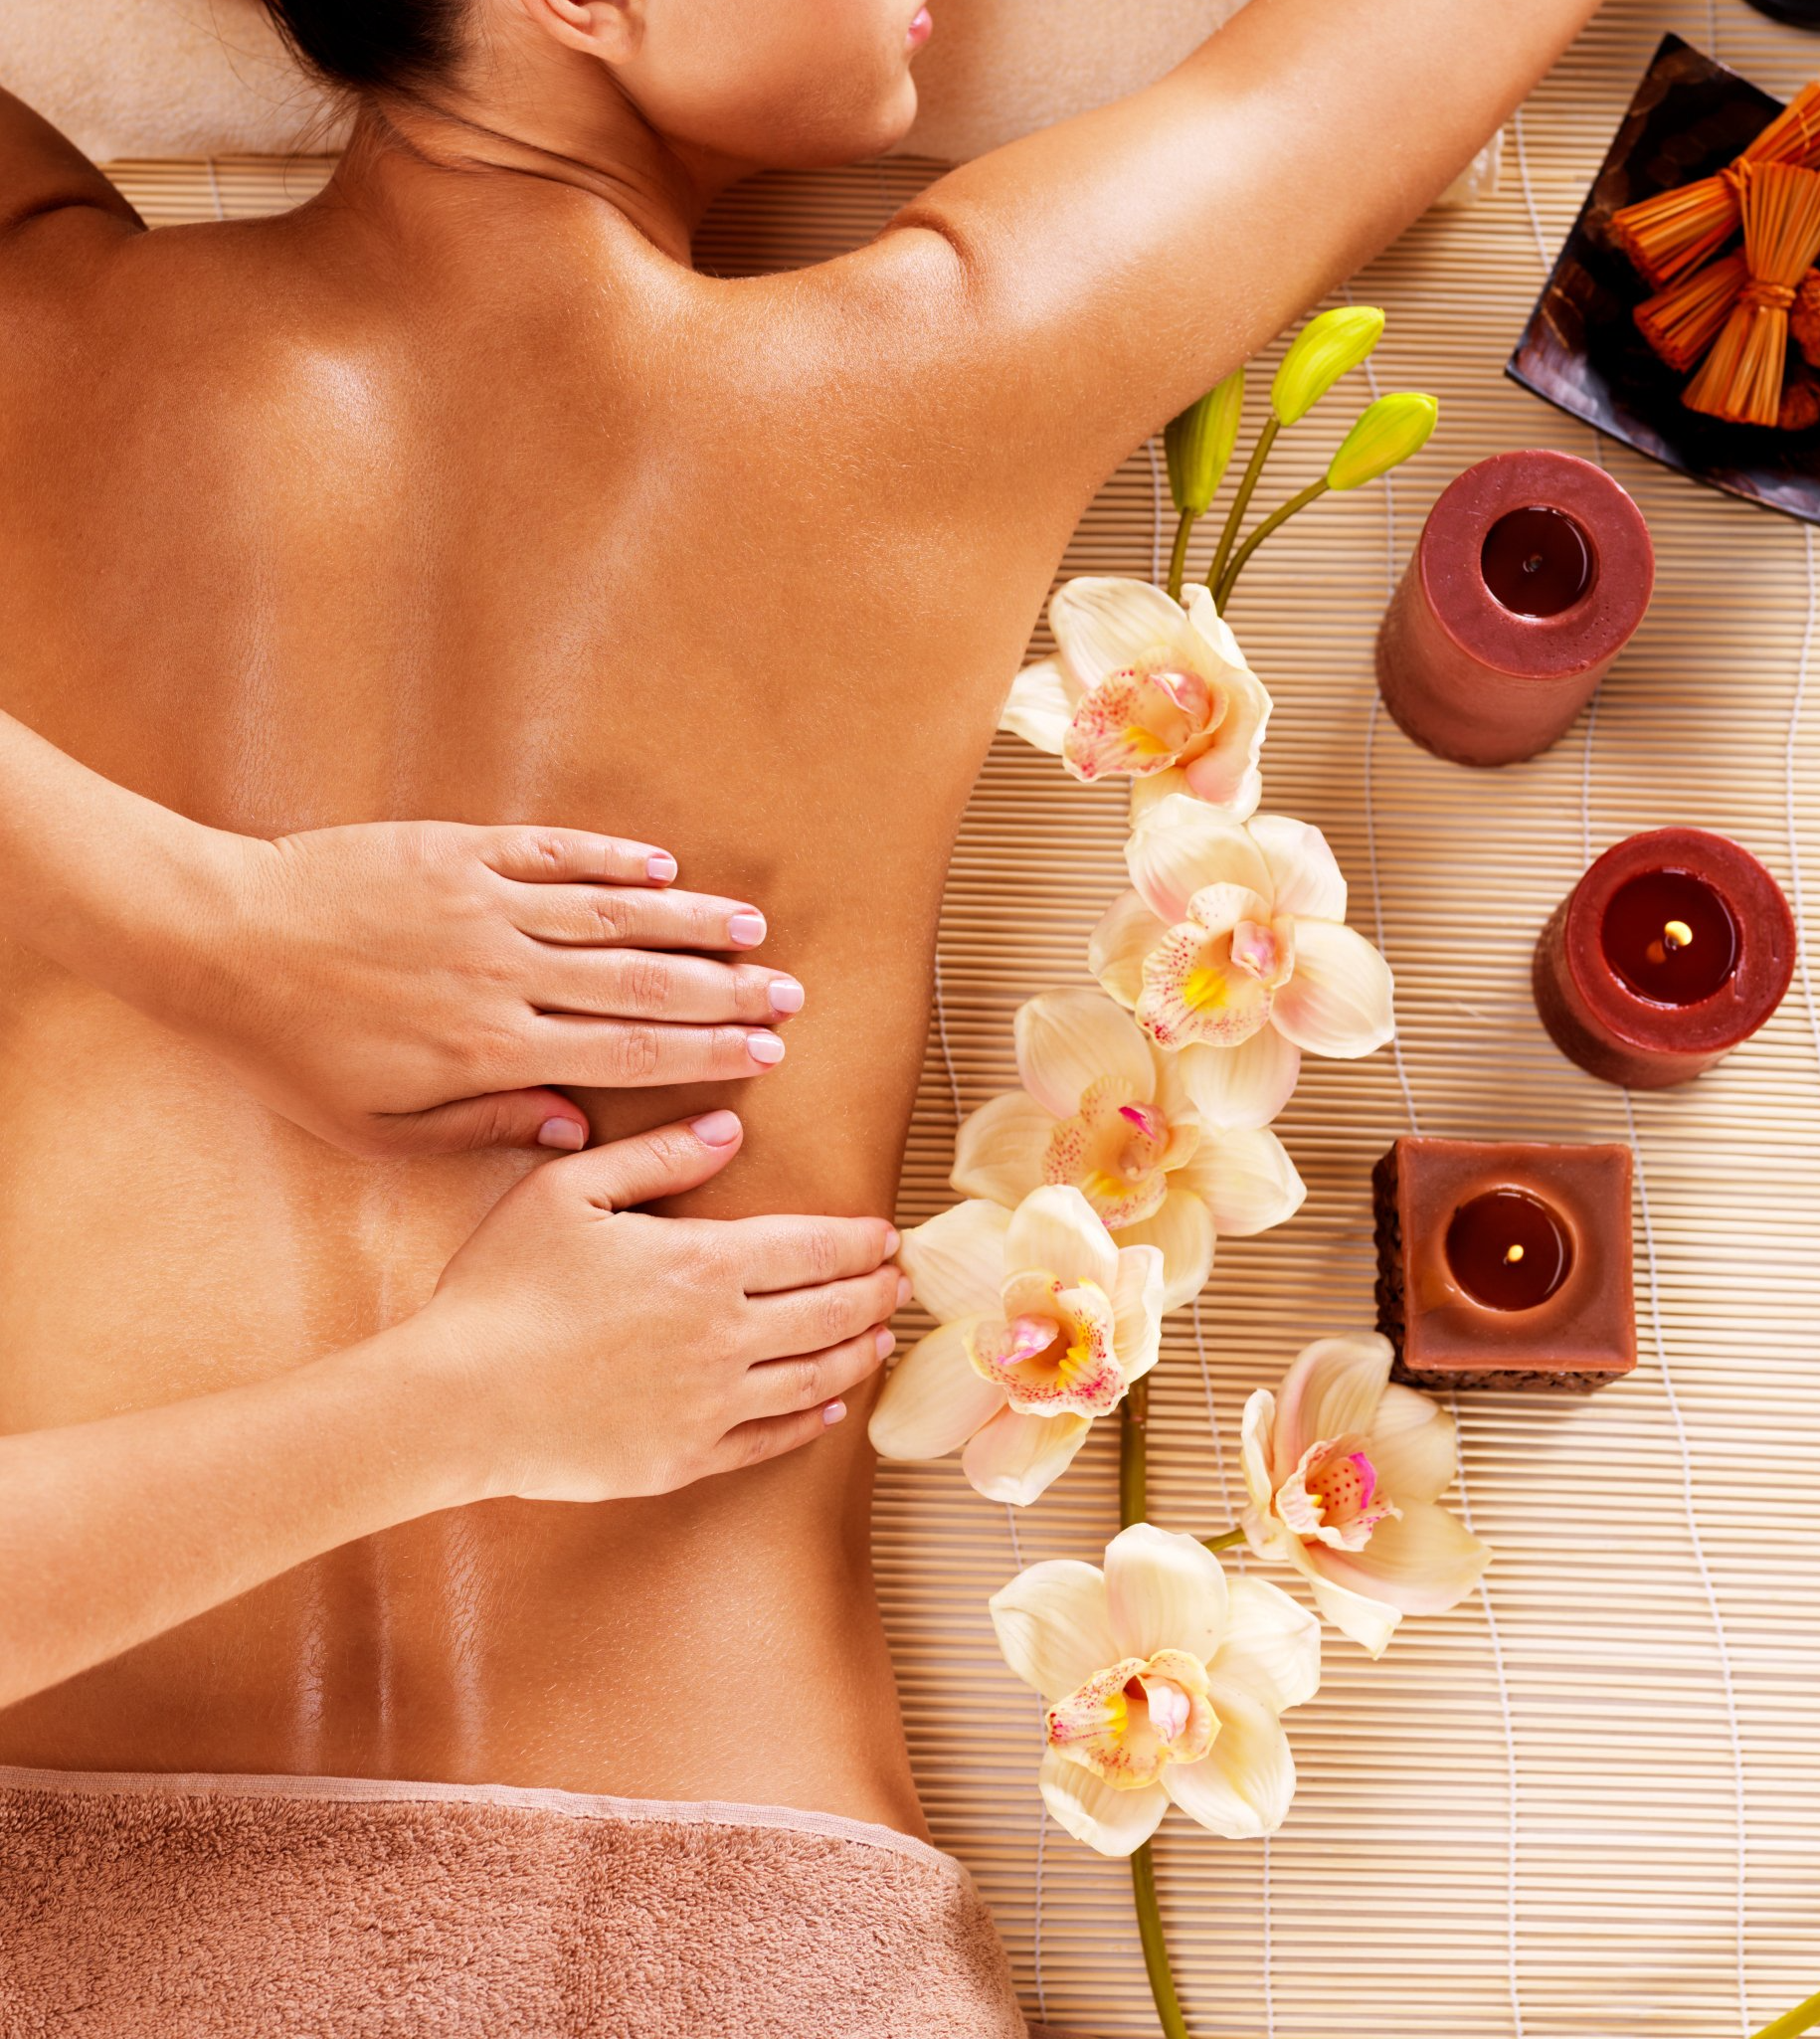 a woman is getting a massage with flowers and candles around her